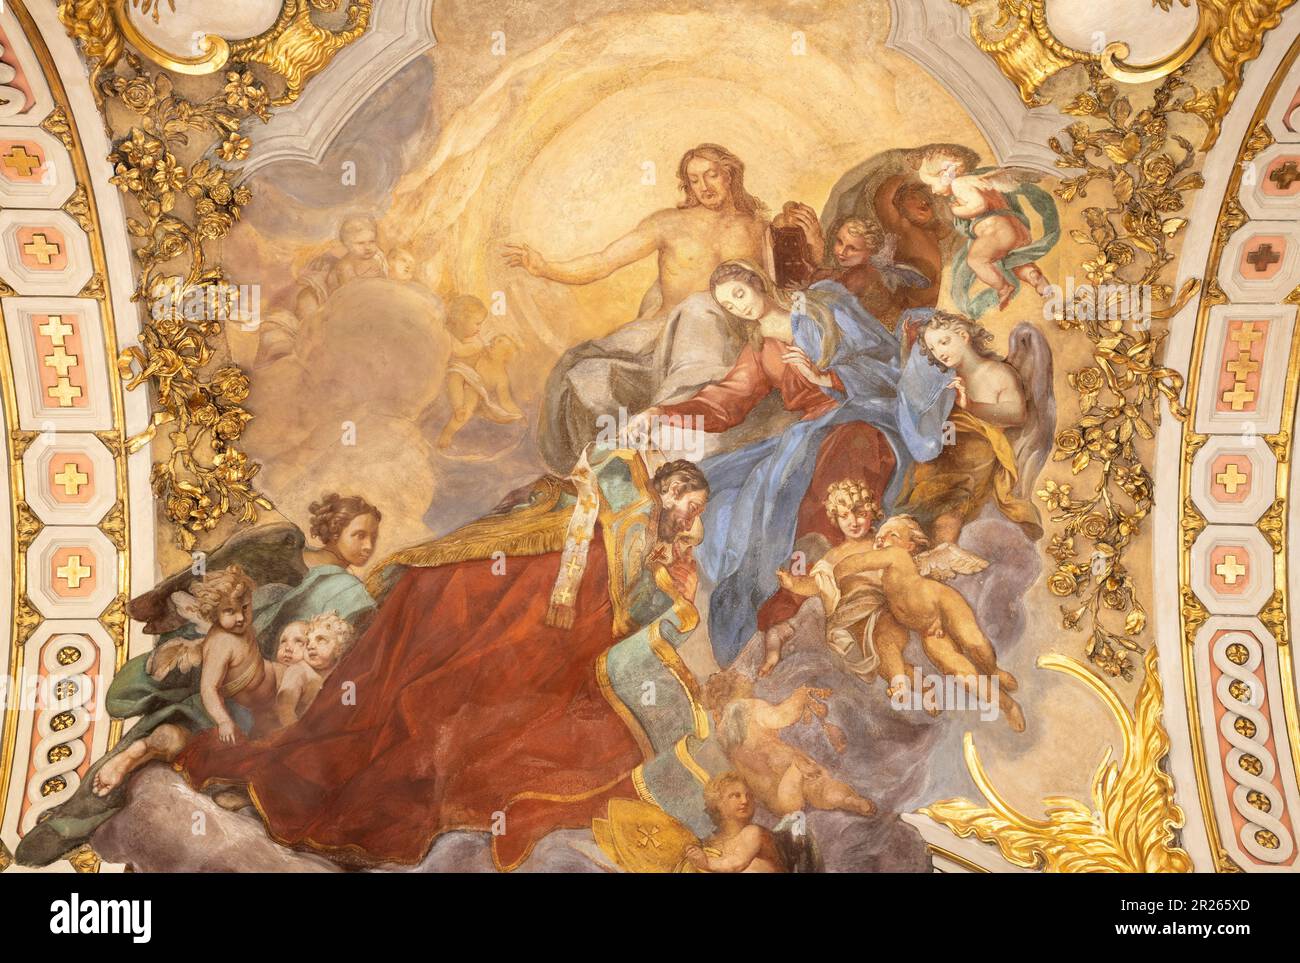 GENOVA, ITALY - MARCH 5, 2023: The fresco of Jesus among the angels in the church Chiesa di Santa Maria Maddalena from 18. cent. Stock Photo